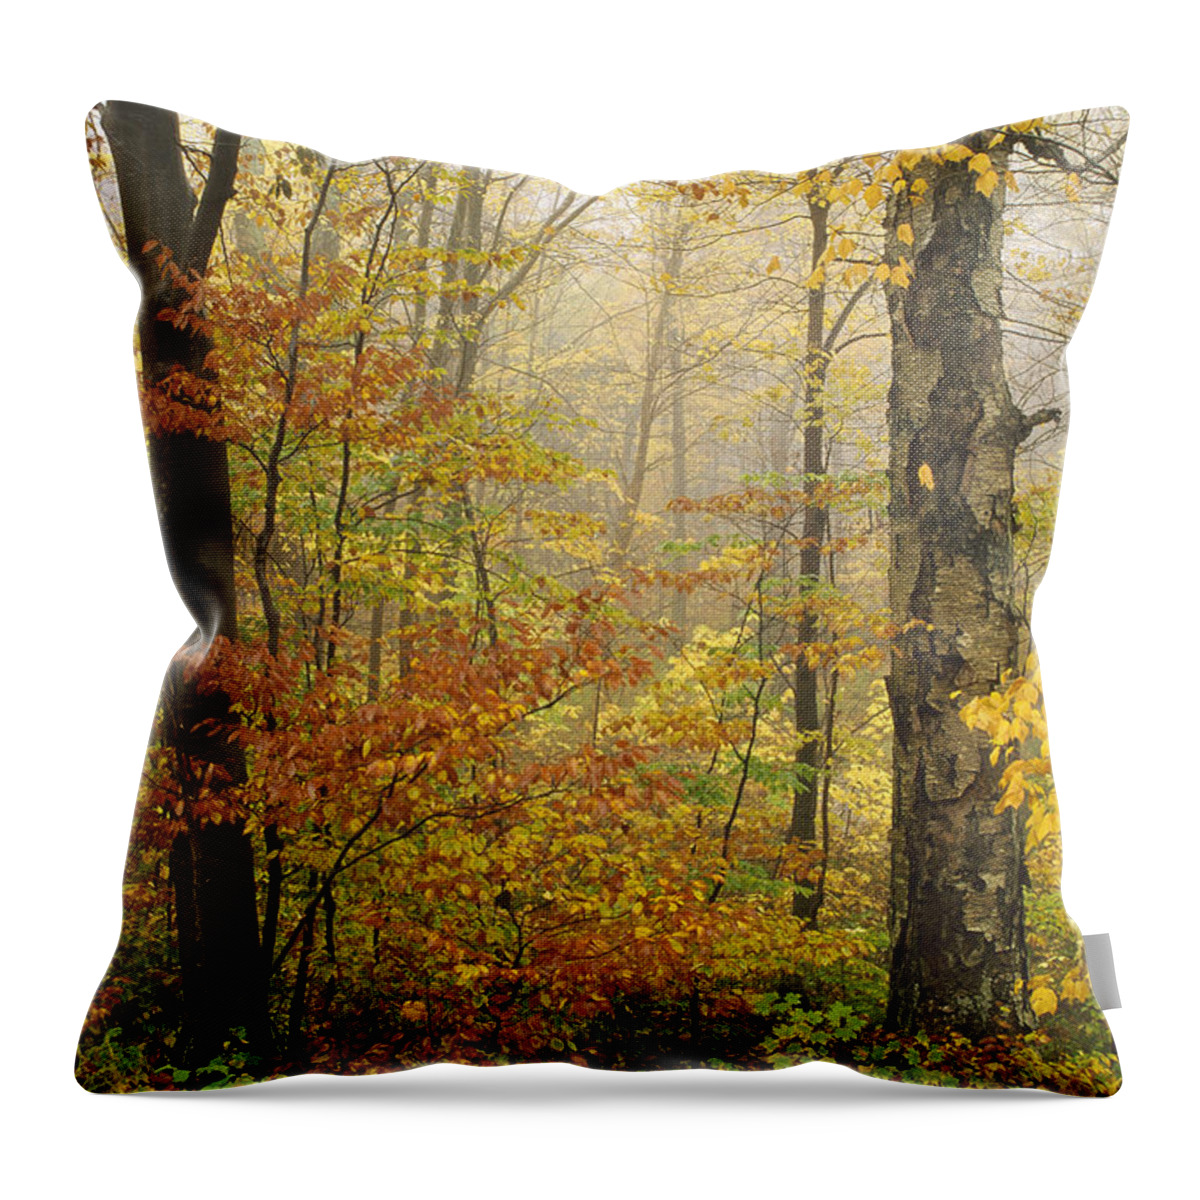 00170775 Throw Pillow featuring the photograph Yellow Birch in Autumn Vermont by Tim Fitzharris